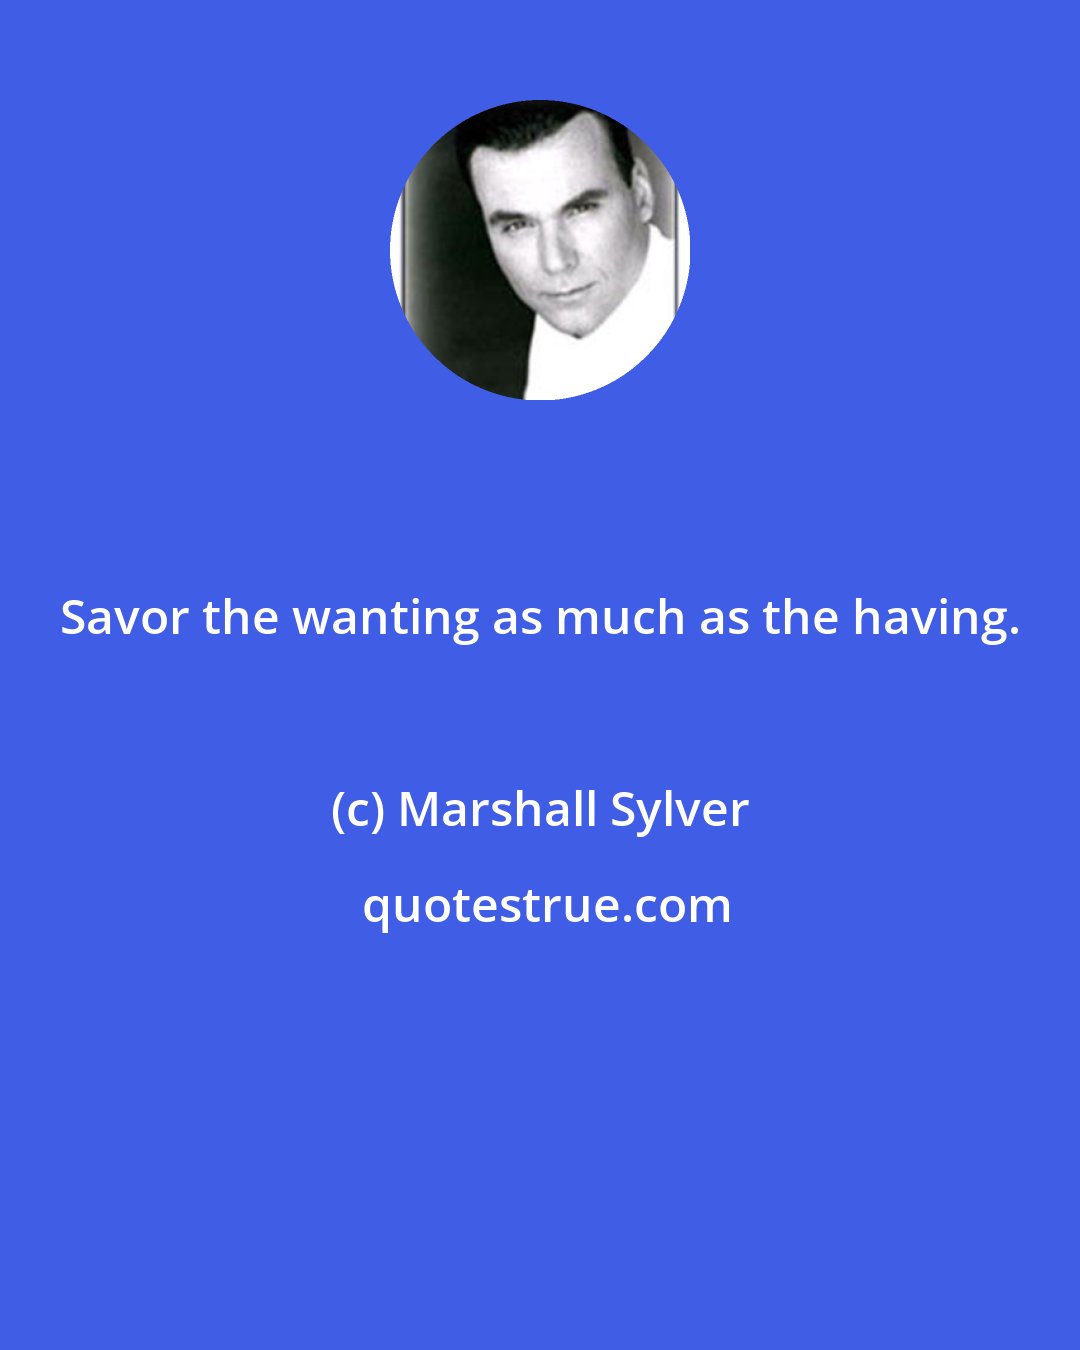 Marshall Sylver: Savor the wanting as much as the having.